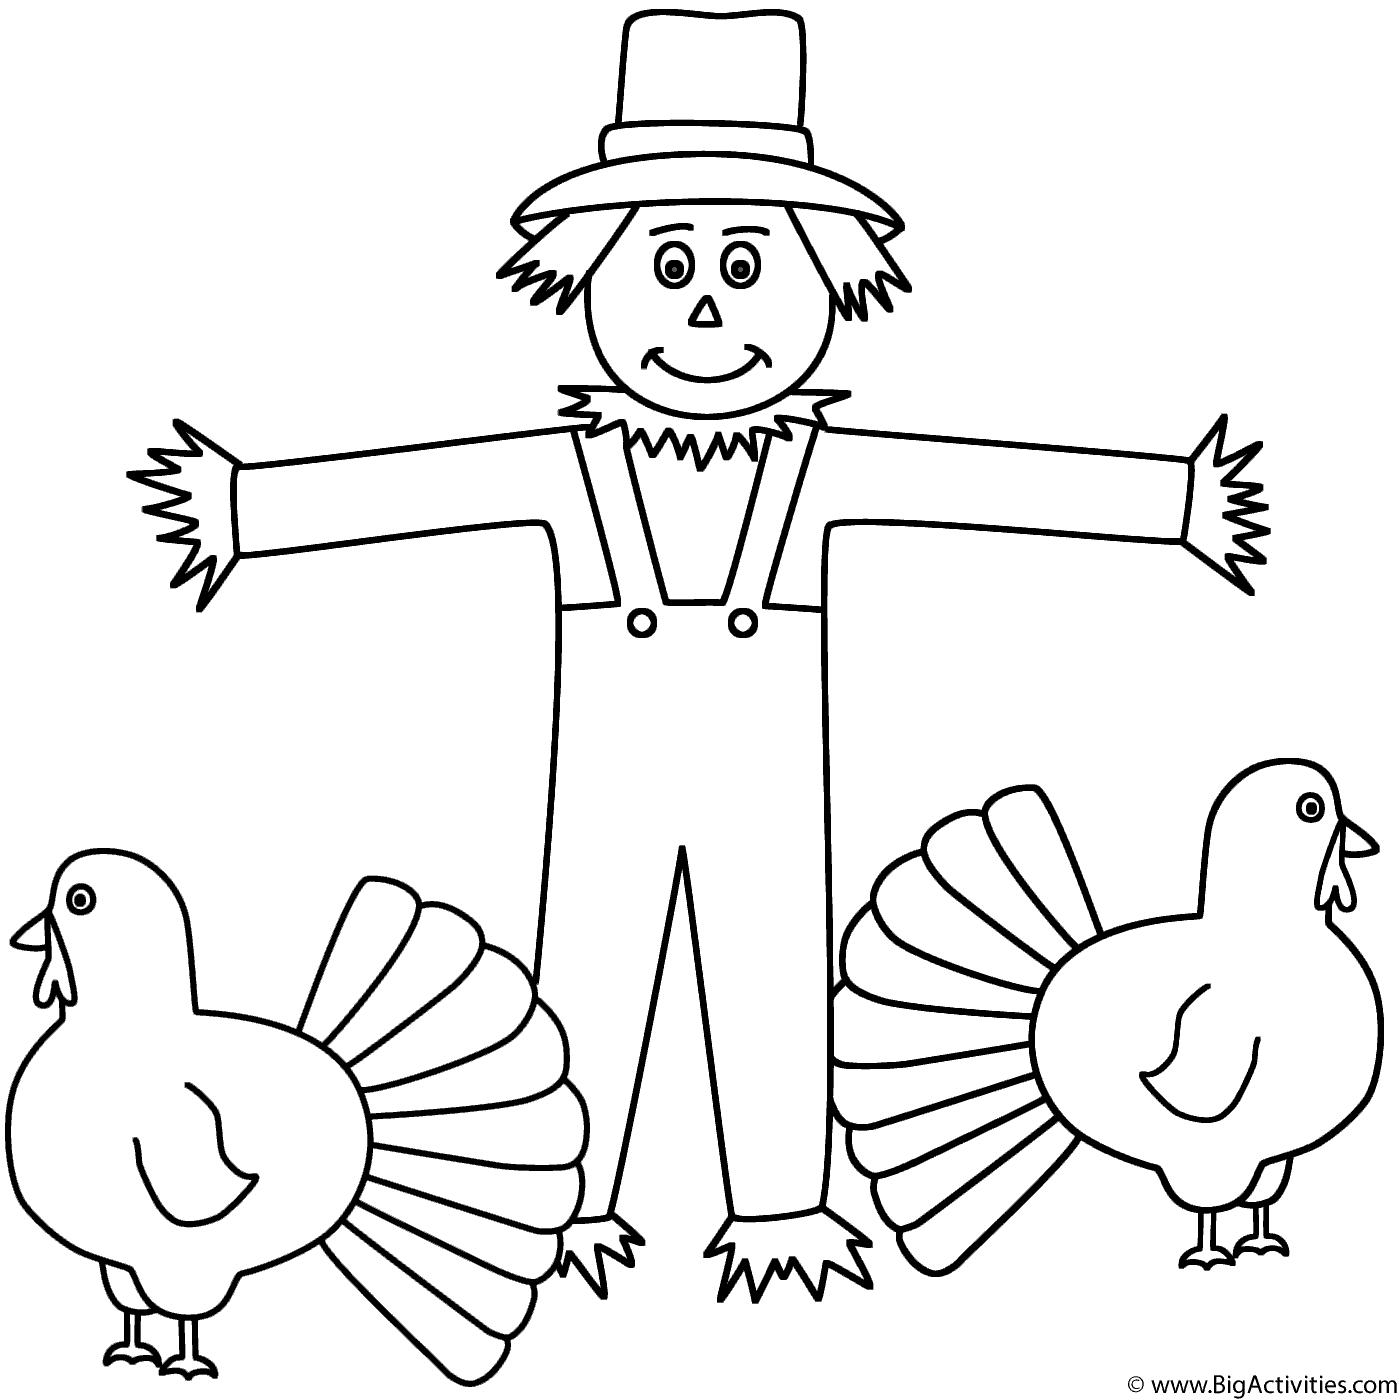 Turkeys with scarecrow - Coloring Page (Thanksgiving)